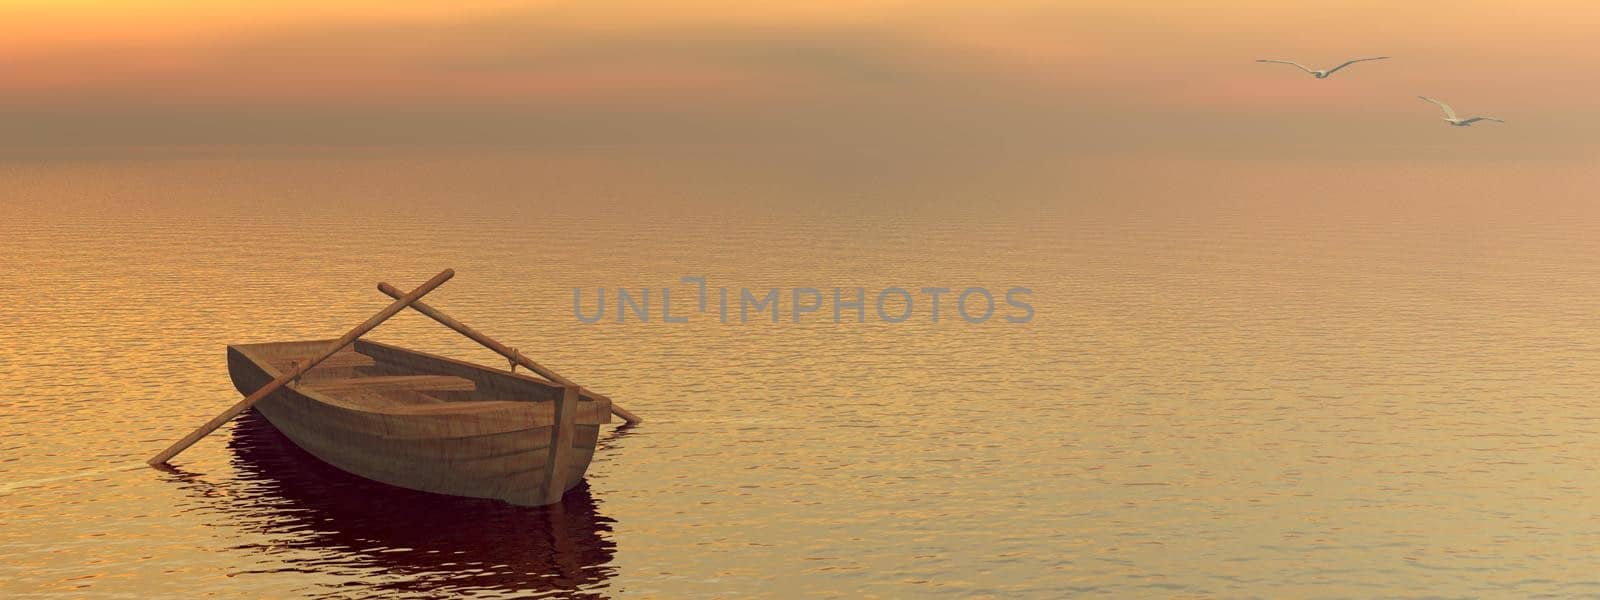 Small wood boat on the water by sunset